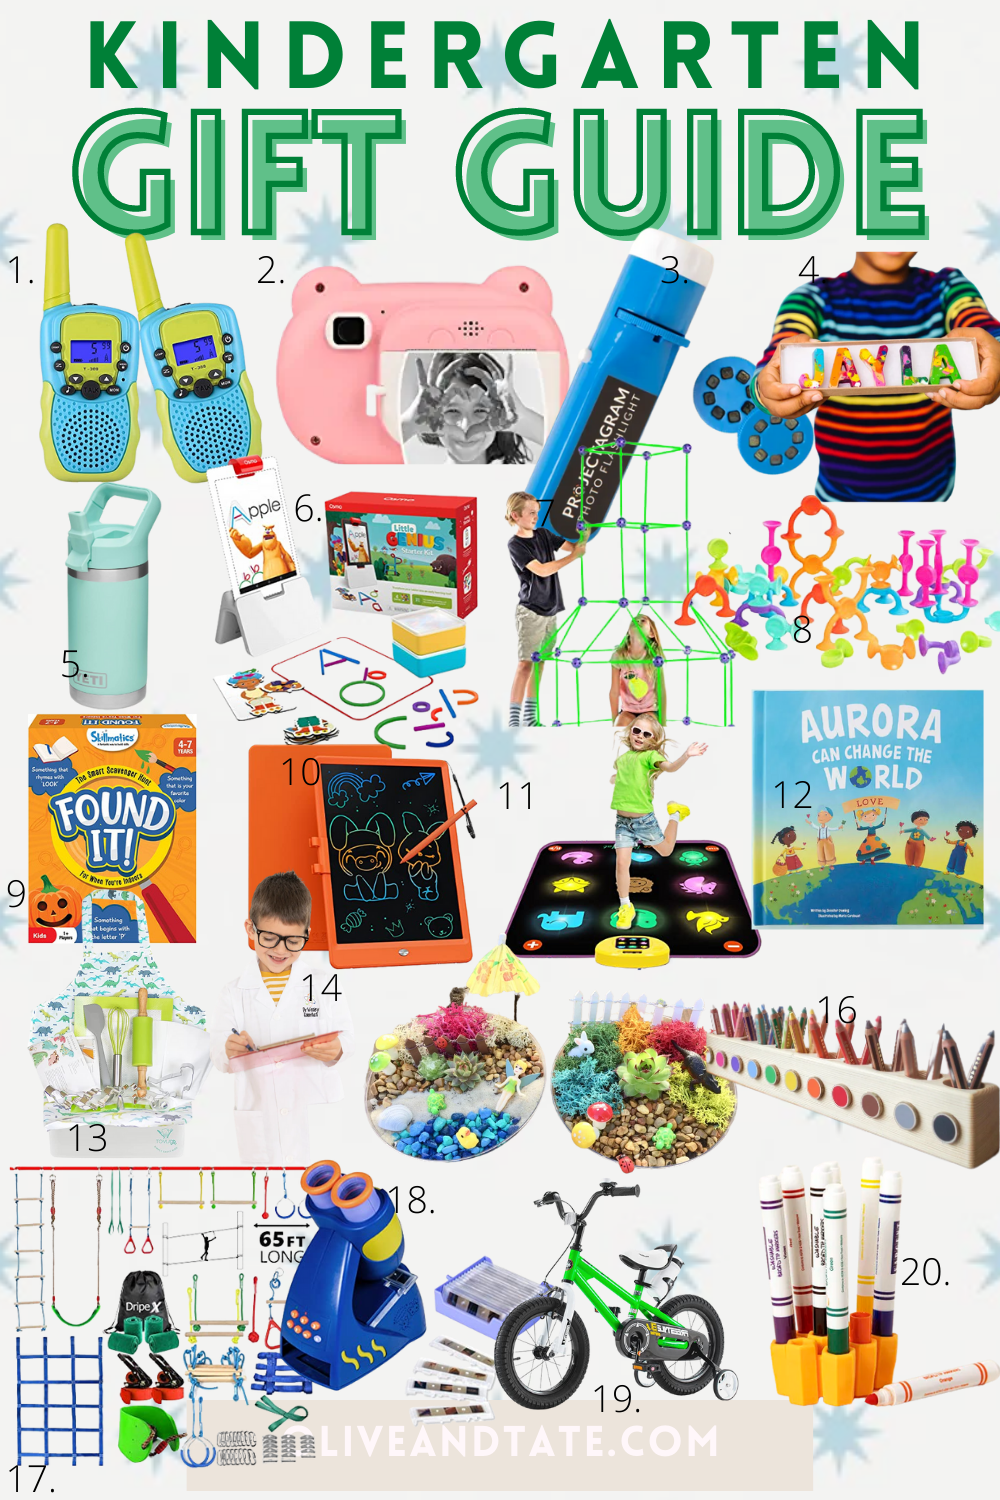 The Best STEM/STEAM Gifts for Kindergarteners